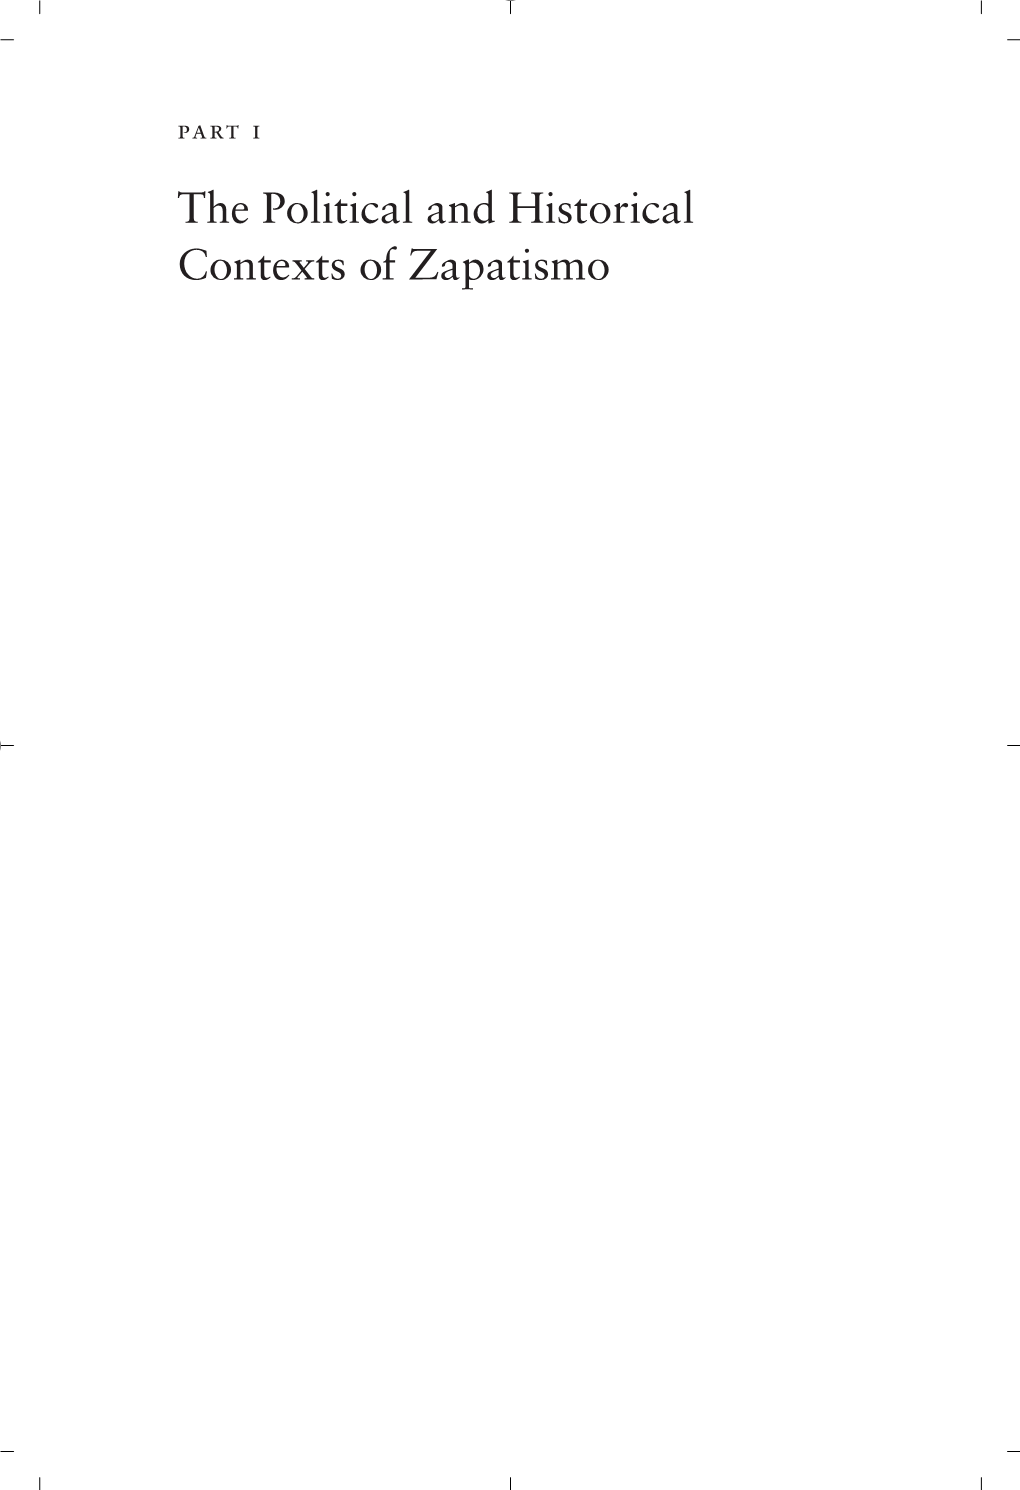 The Political and Historical Contexts of Zapatismo 01-C1900 9/19/2001 3:14 PM Page 2 01-C1900 9/19/2001 3:14 PM Page 3